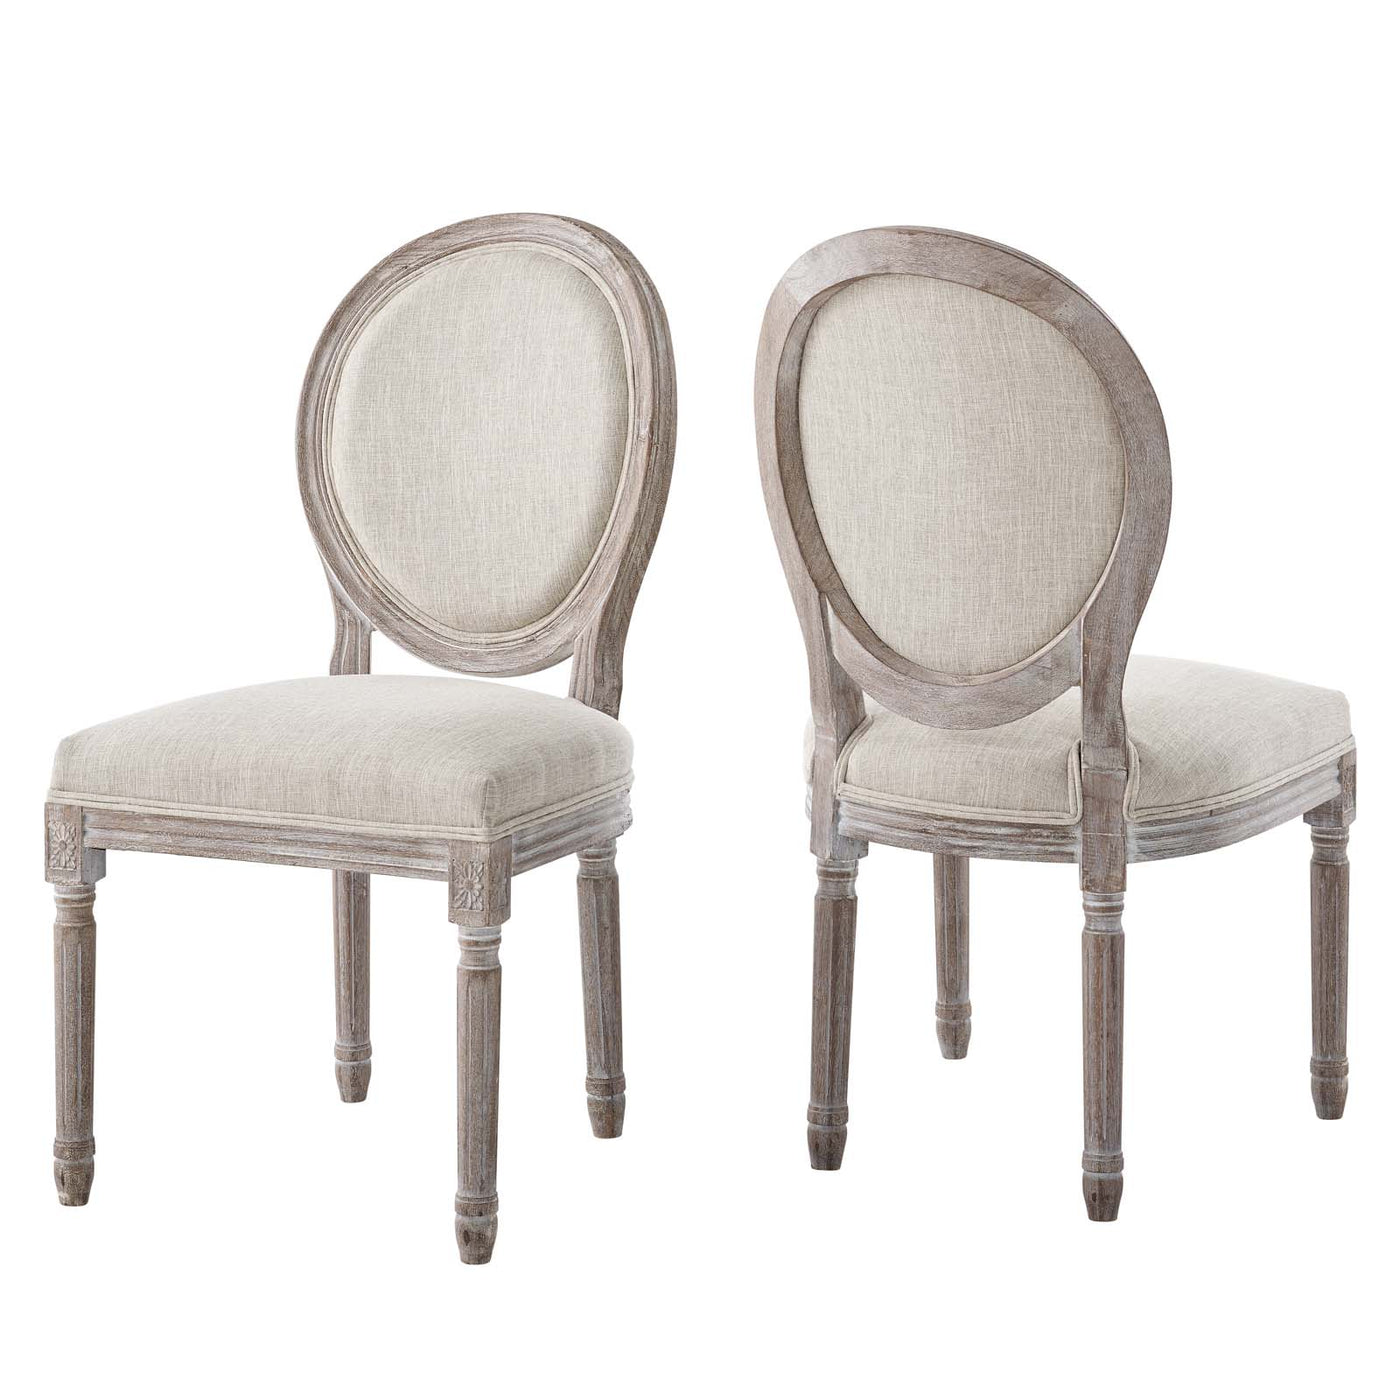 Emanate Dining Side Chair Upholstered Fabric Set of 2